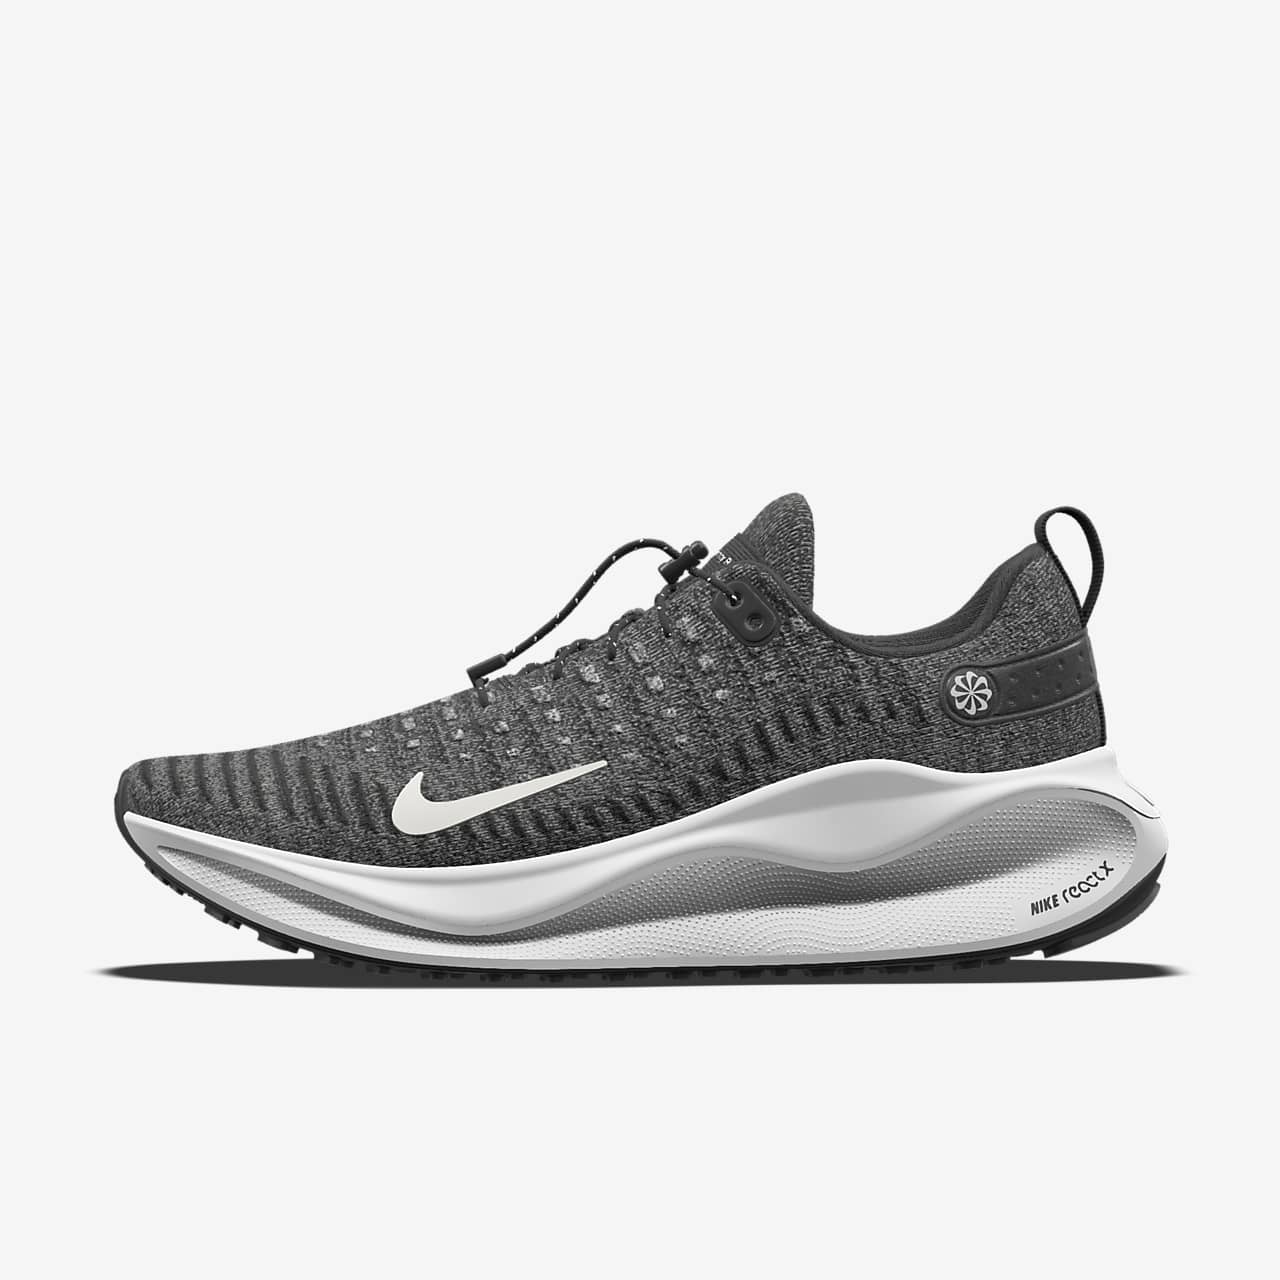 Chaussure de running sur route personnalisable Nike InfinityRN 4 By You pour homme